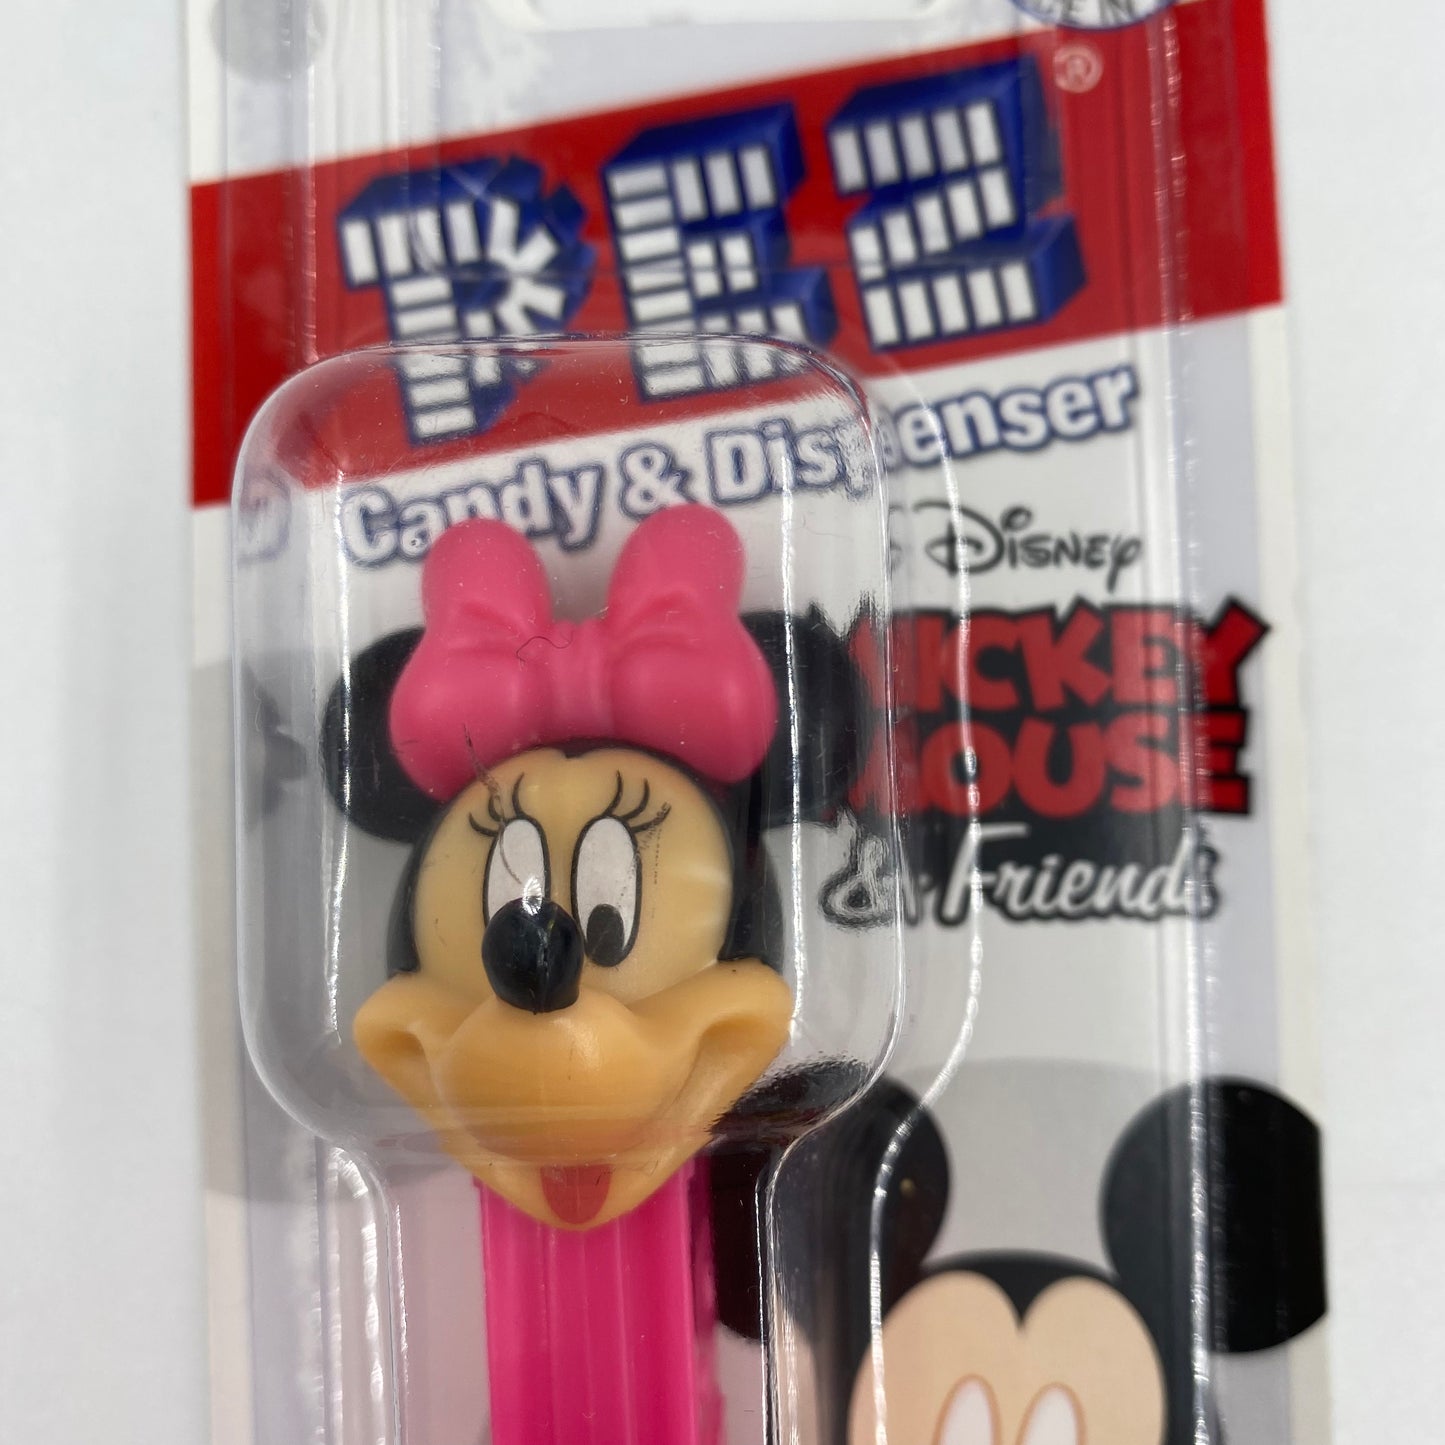 Disney Mickey Mouse & Friends Minnie Mouse PEZ dispenser (2009) carded